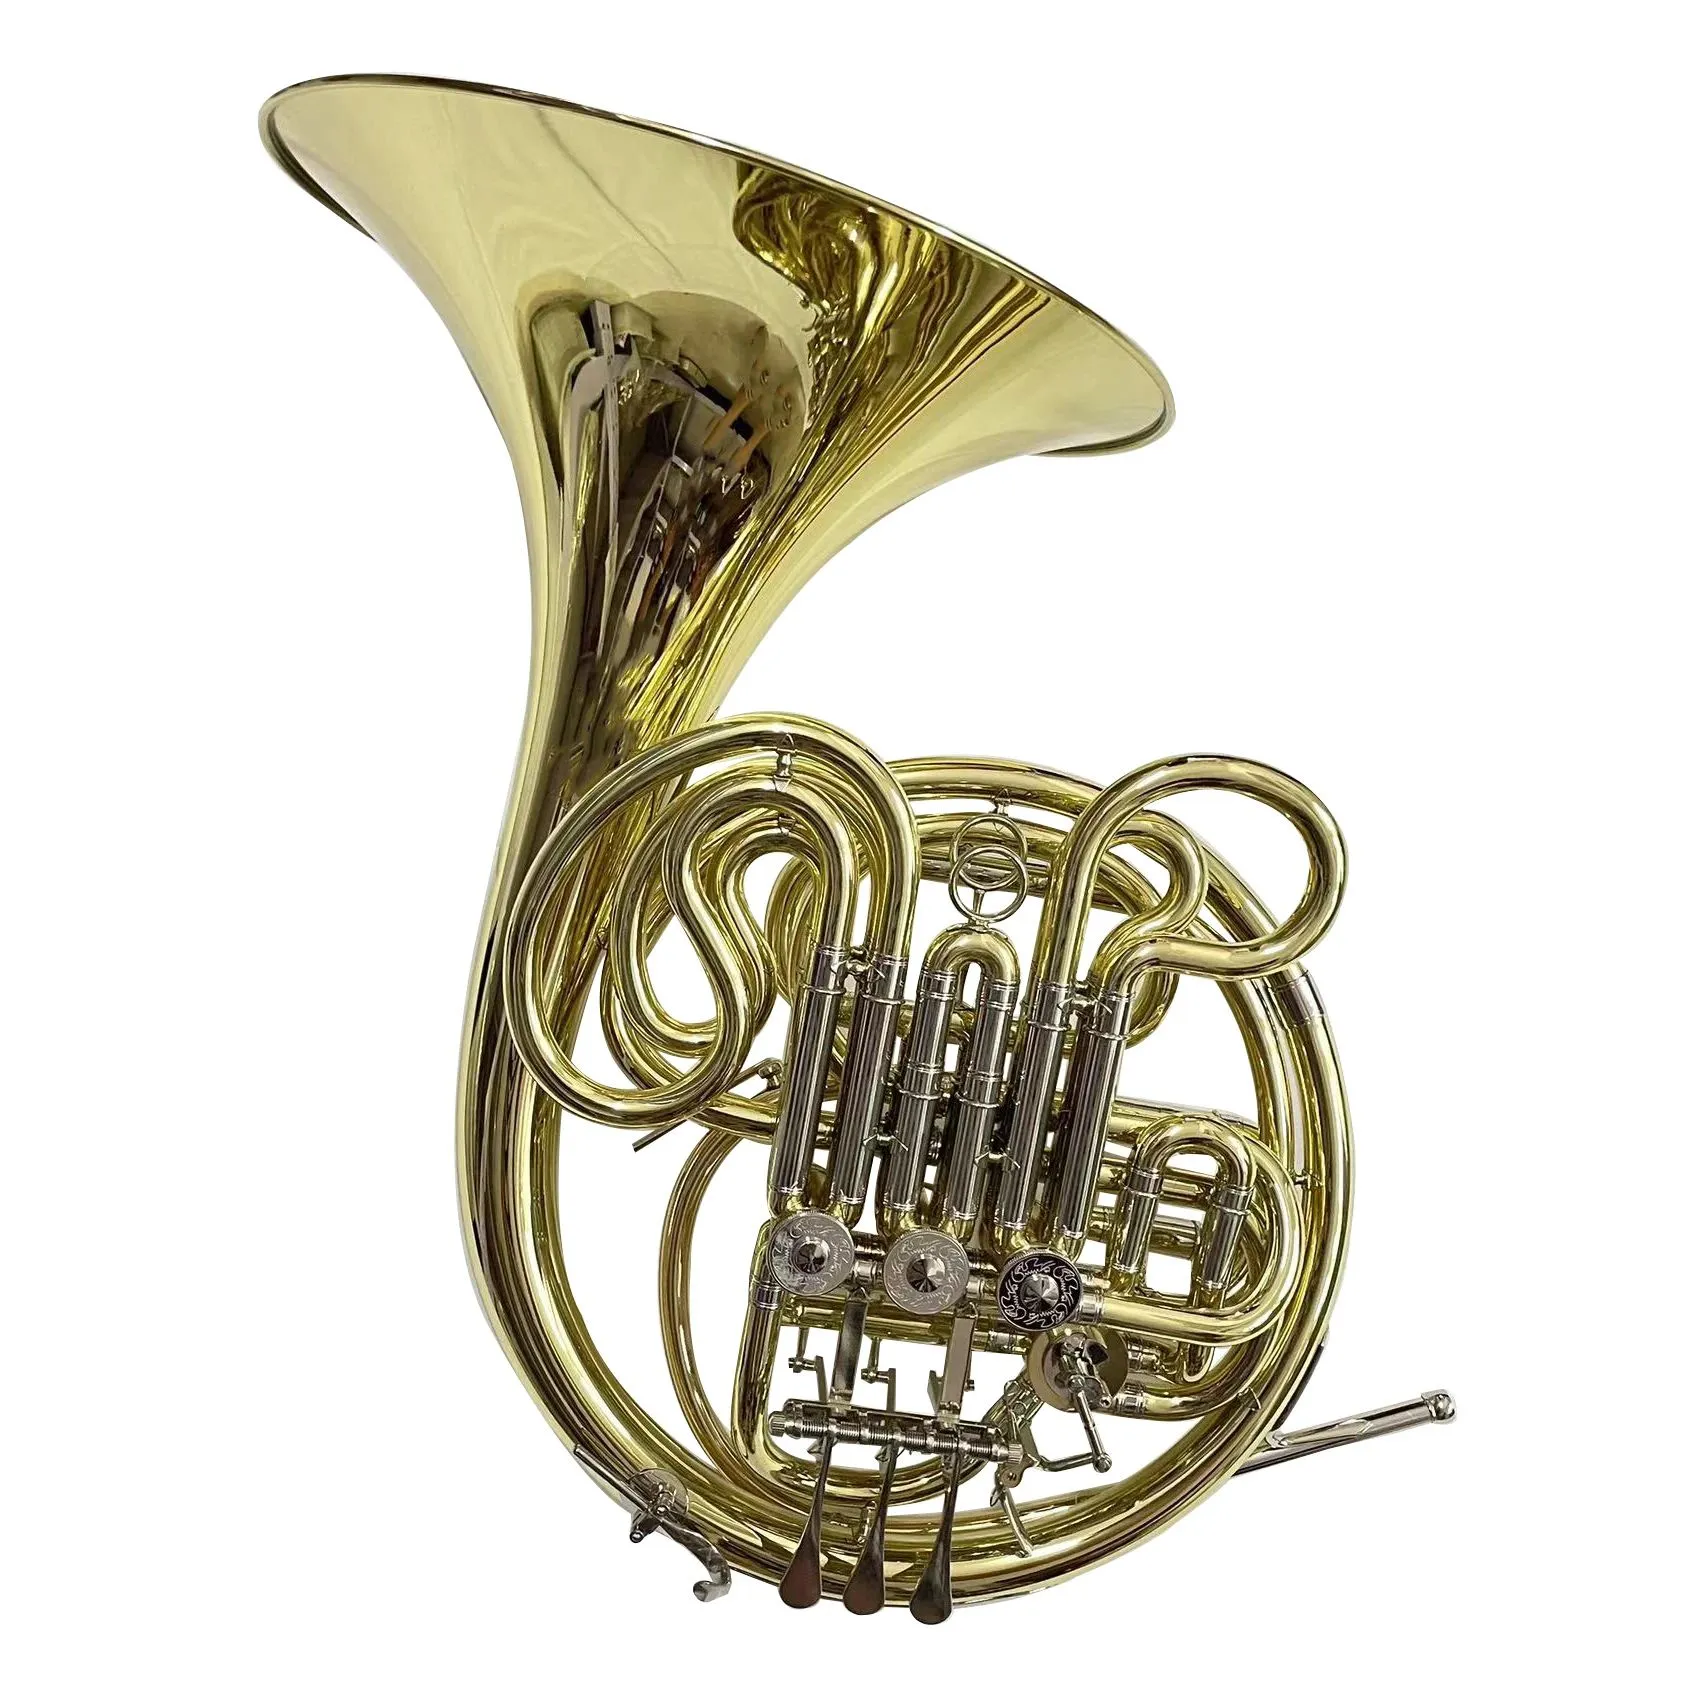 Popular market selling yellow brass departed french horn for professional player